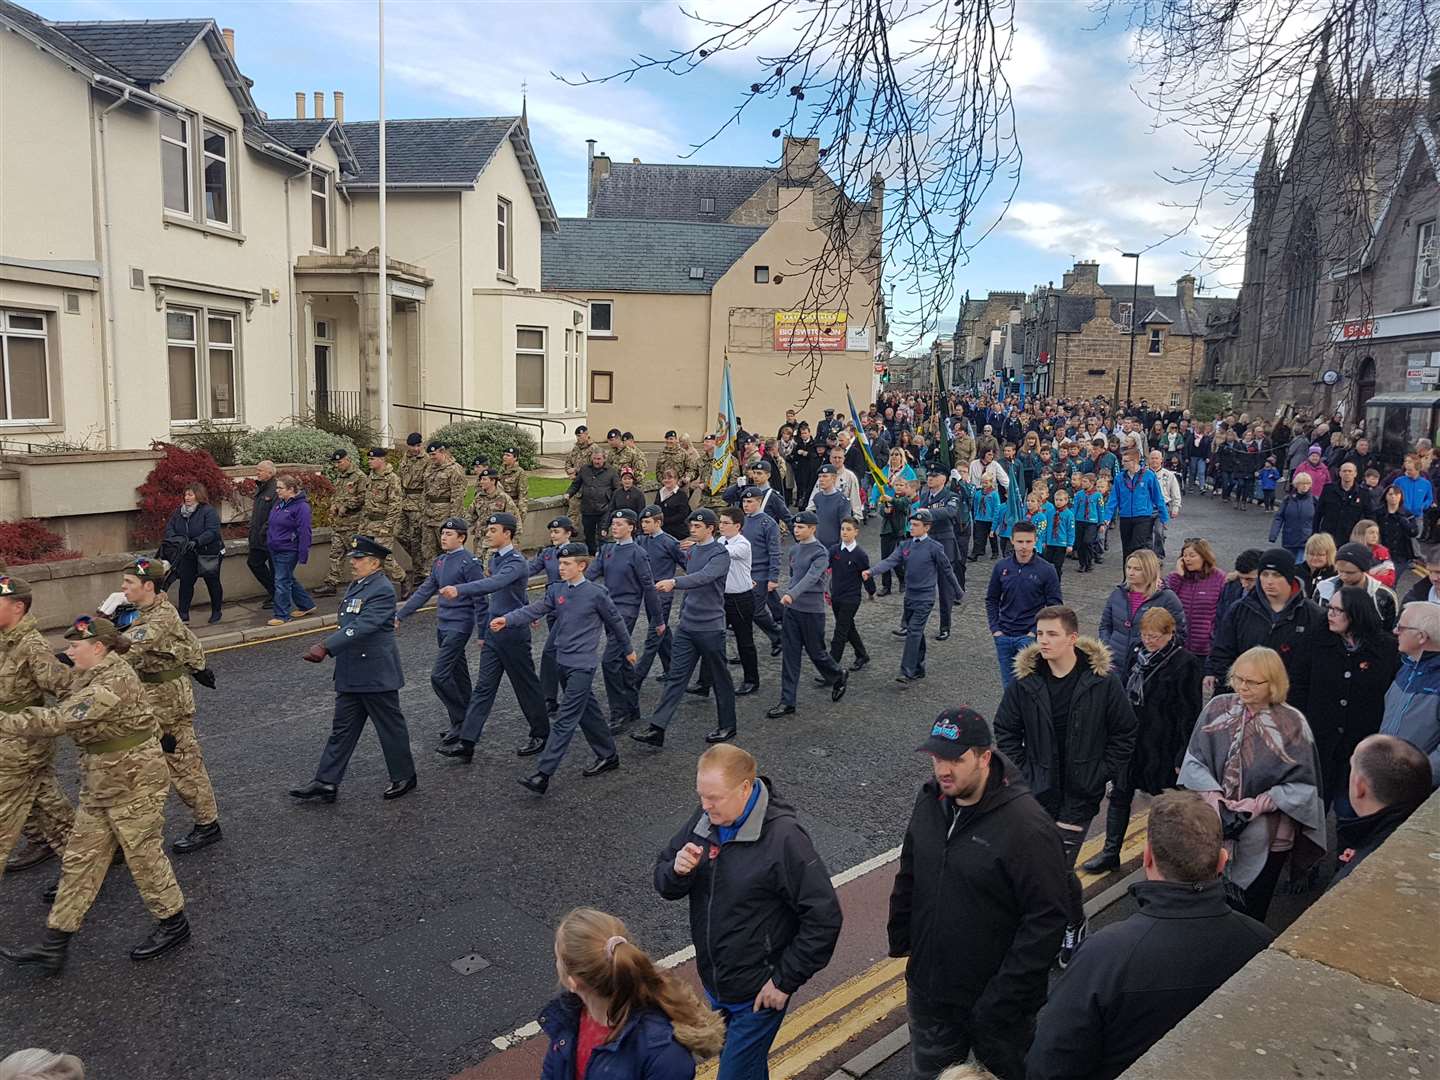 Local Air Cadets leading younger groups down Bridge Street.